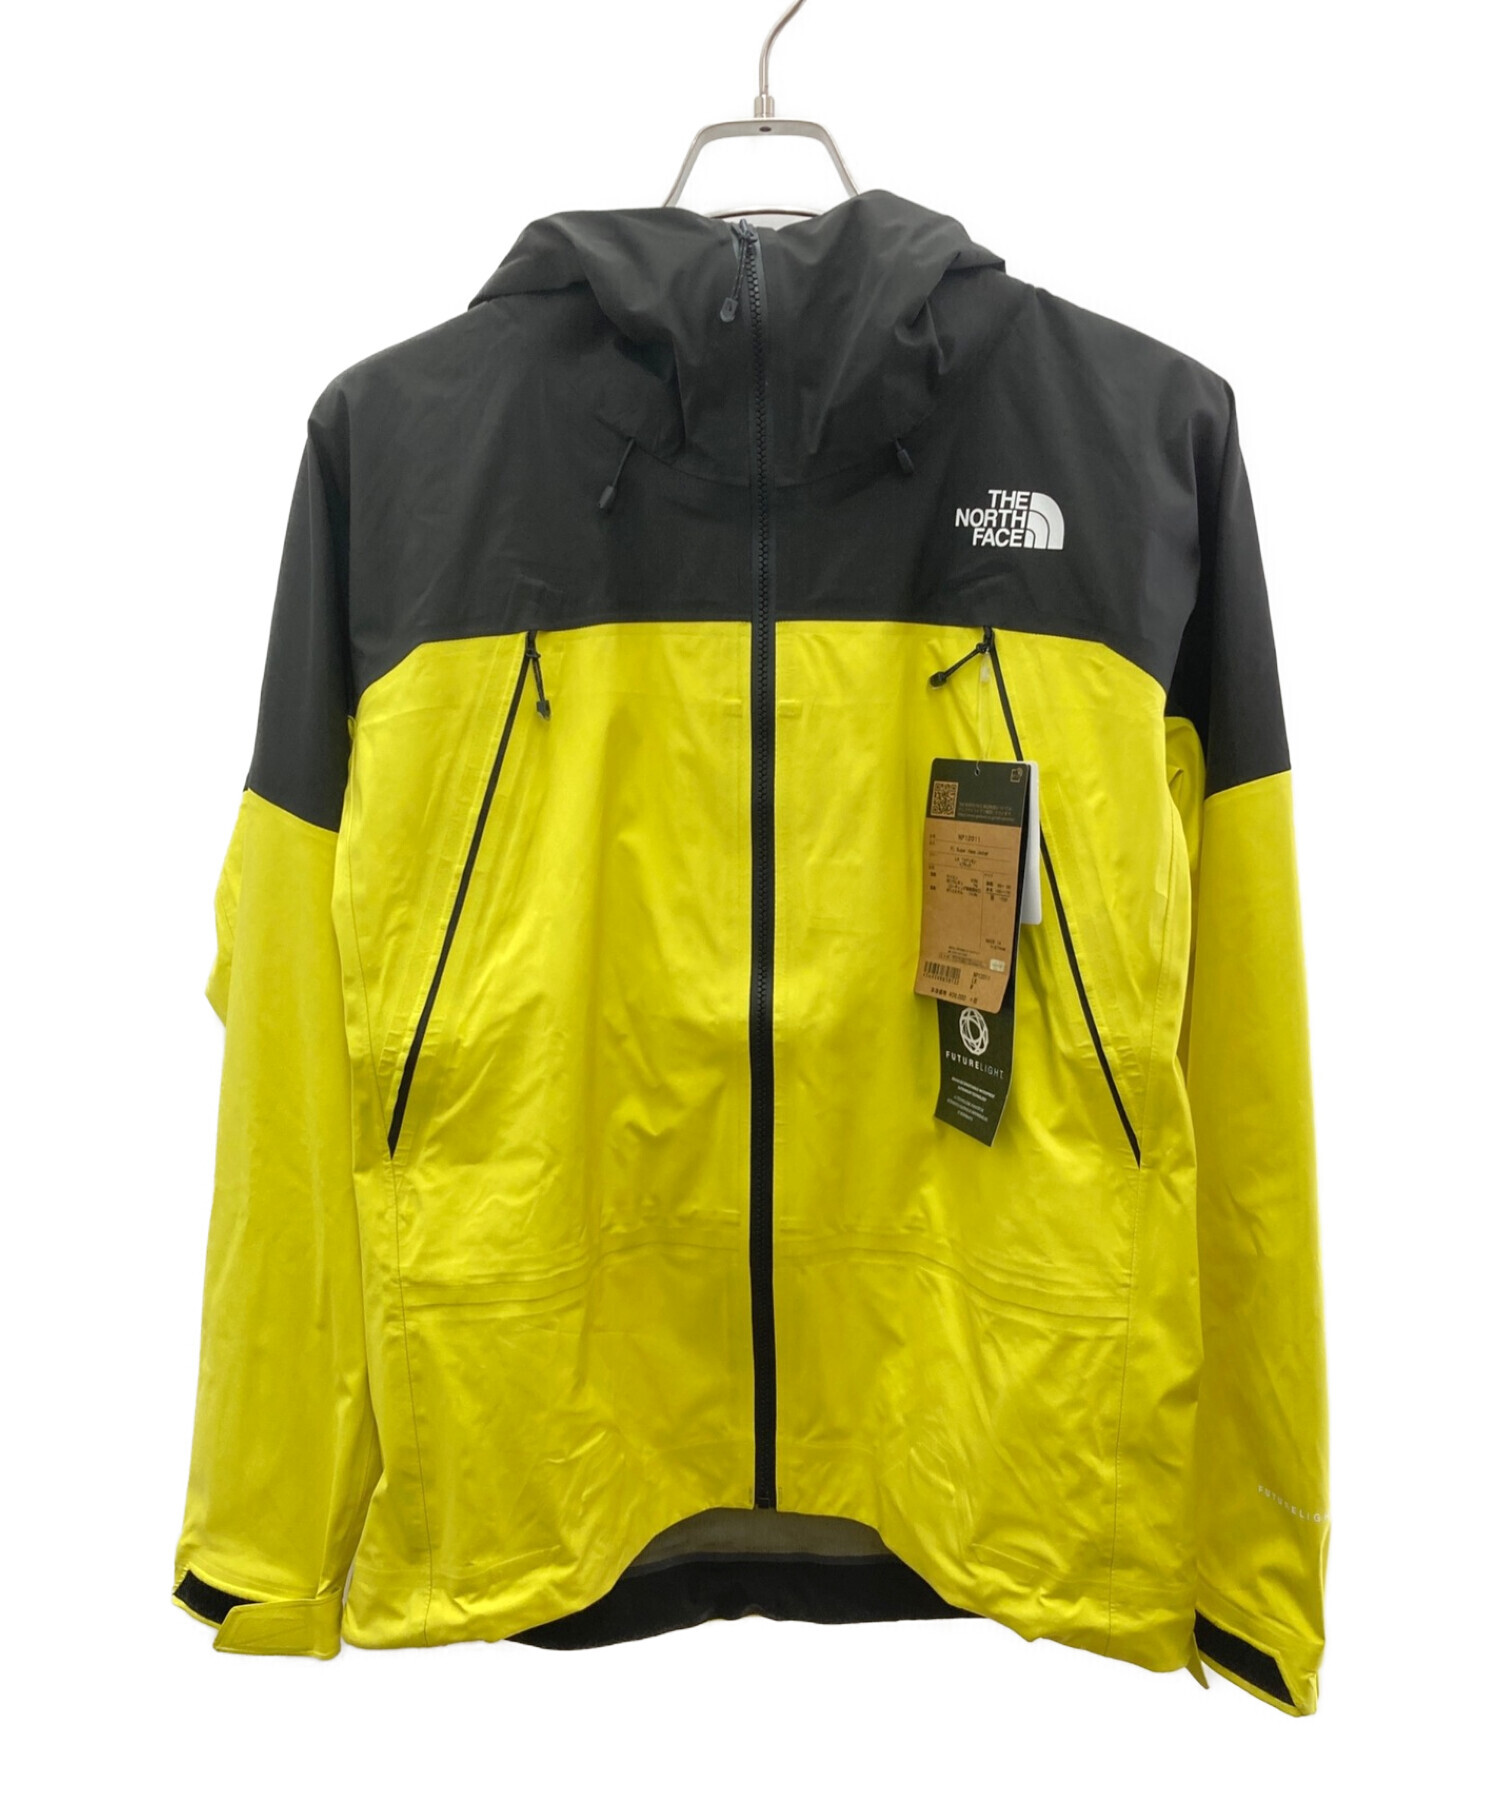 The North Face ジャケット　イエロー　新品未使用